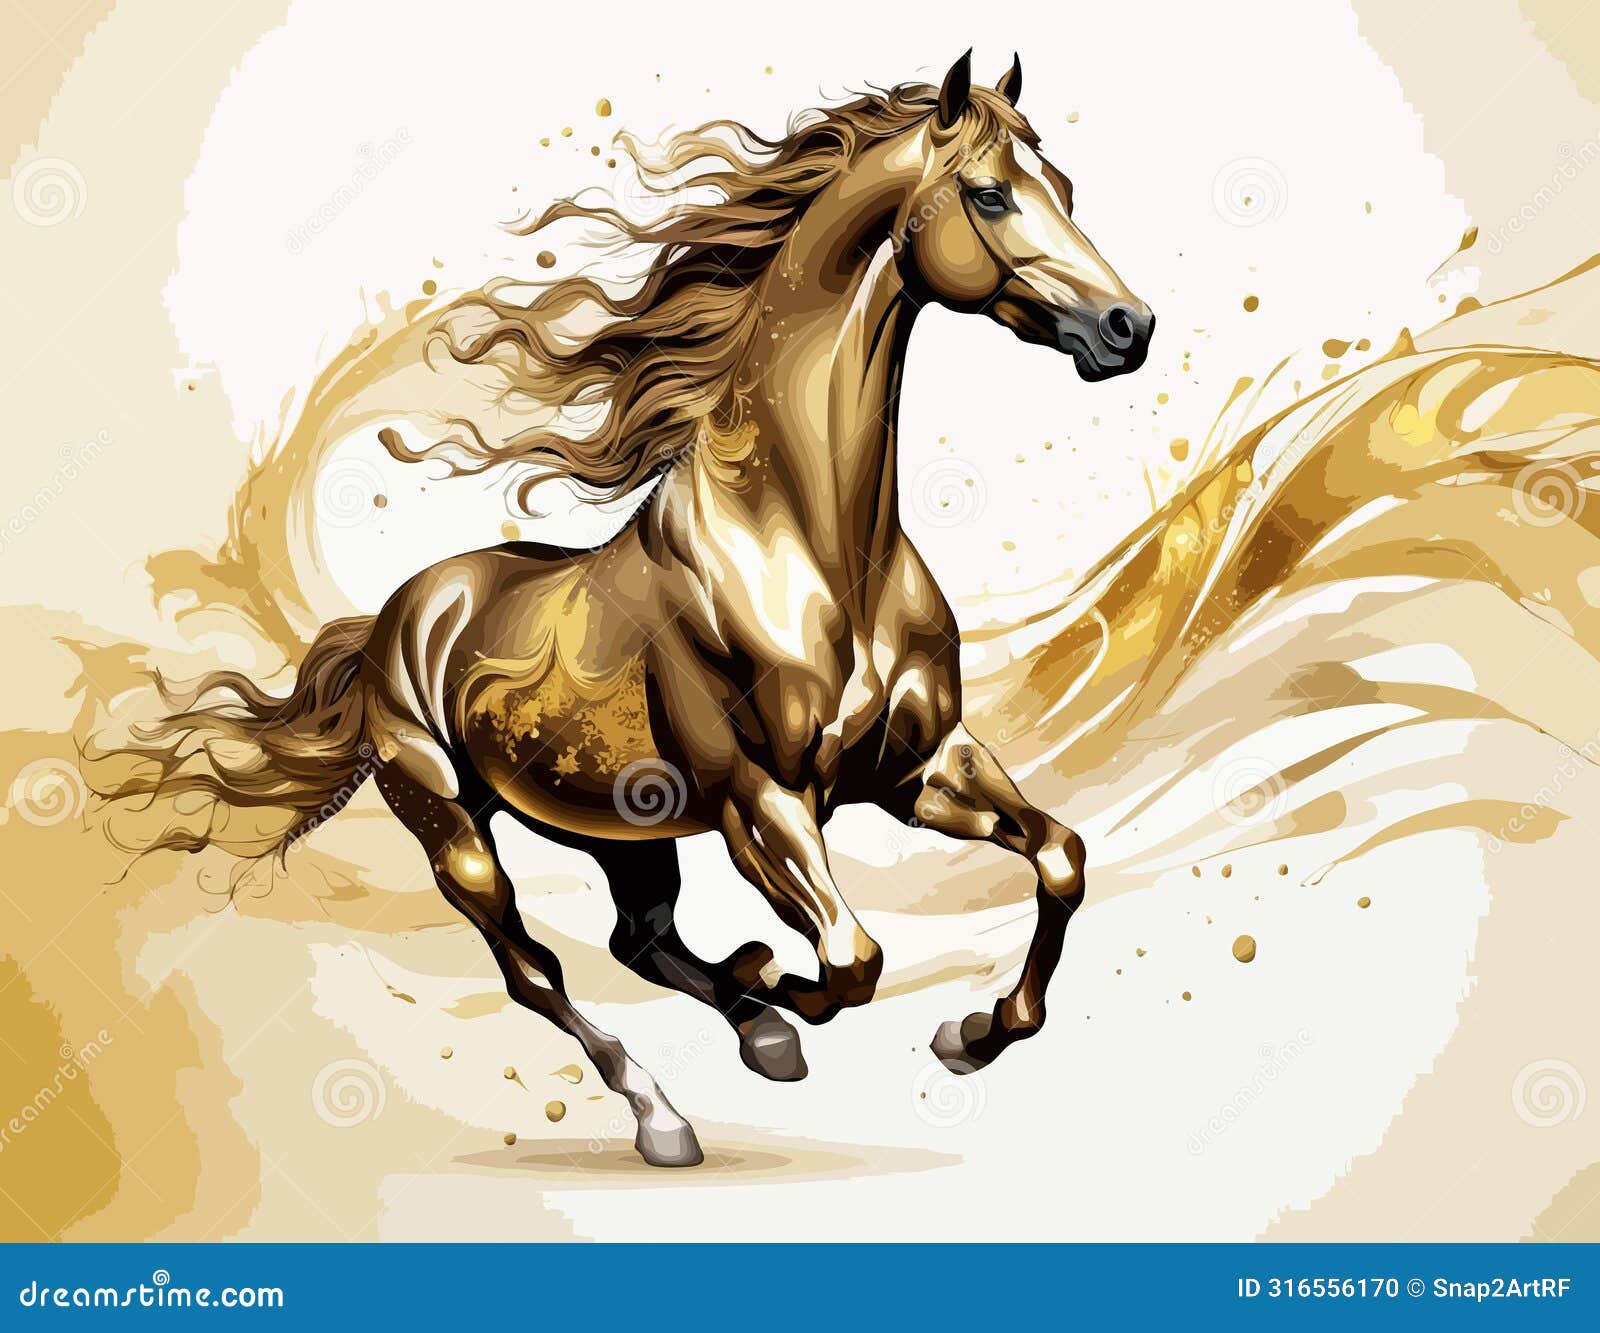 high detailed full color  - a fantastical, glowing conceptual  of a golden powerfully muscular stallion